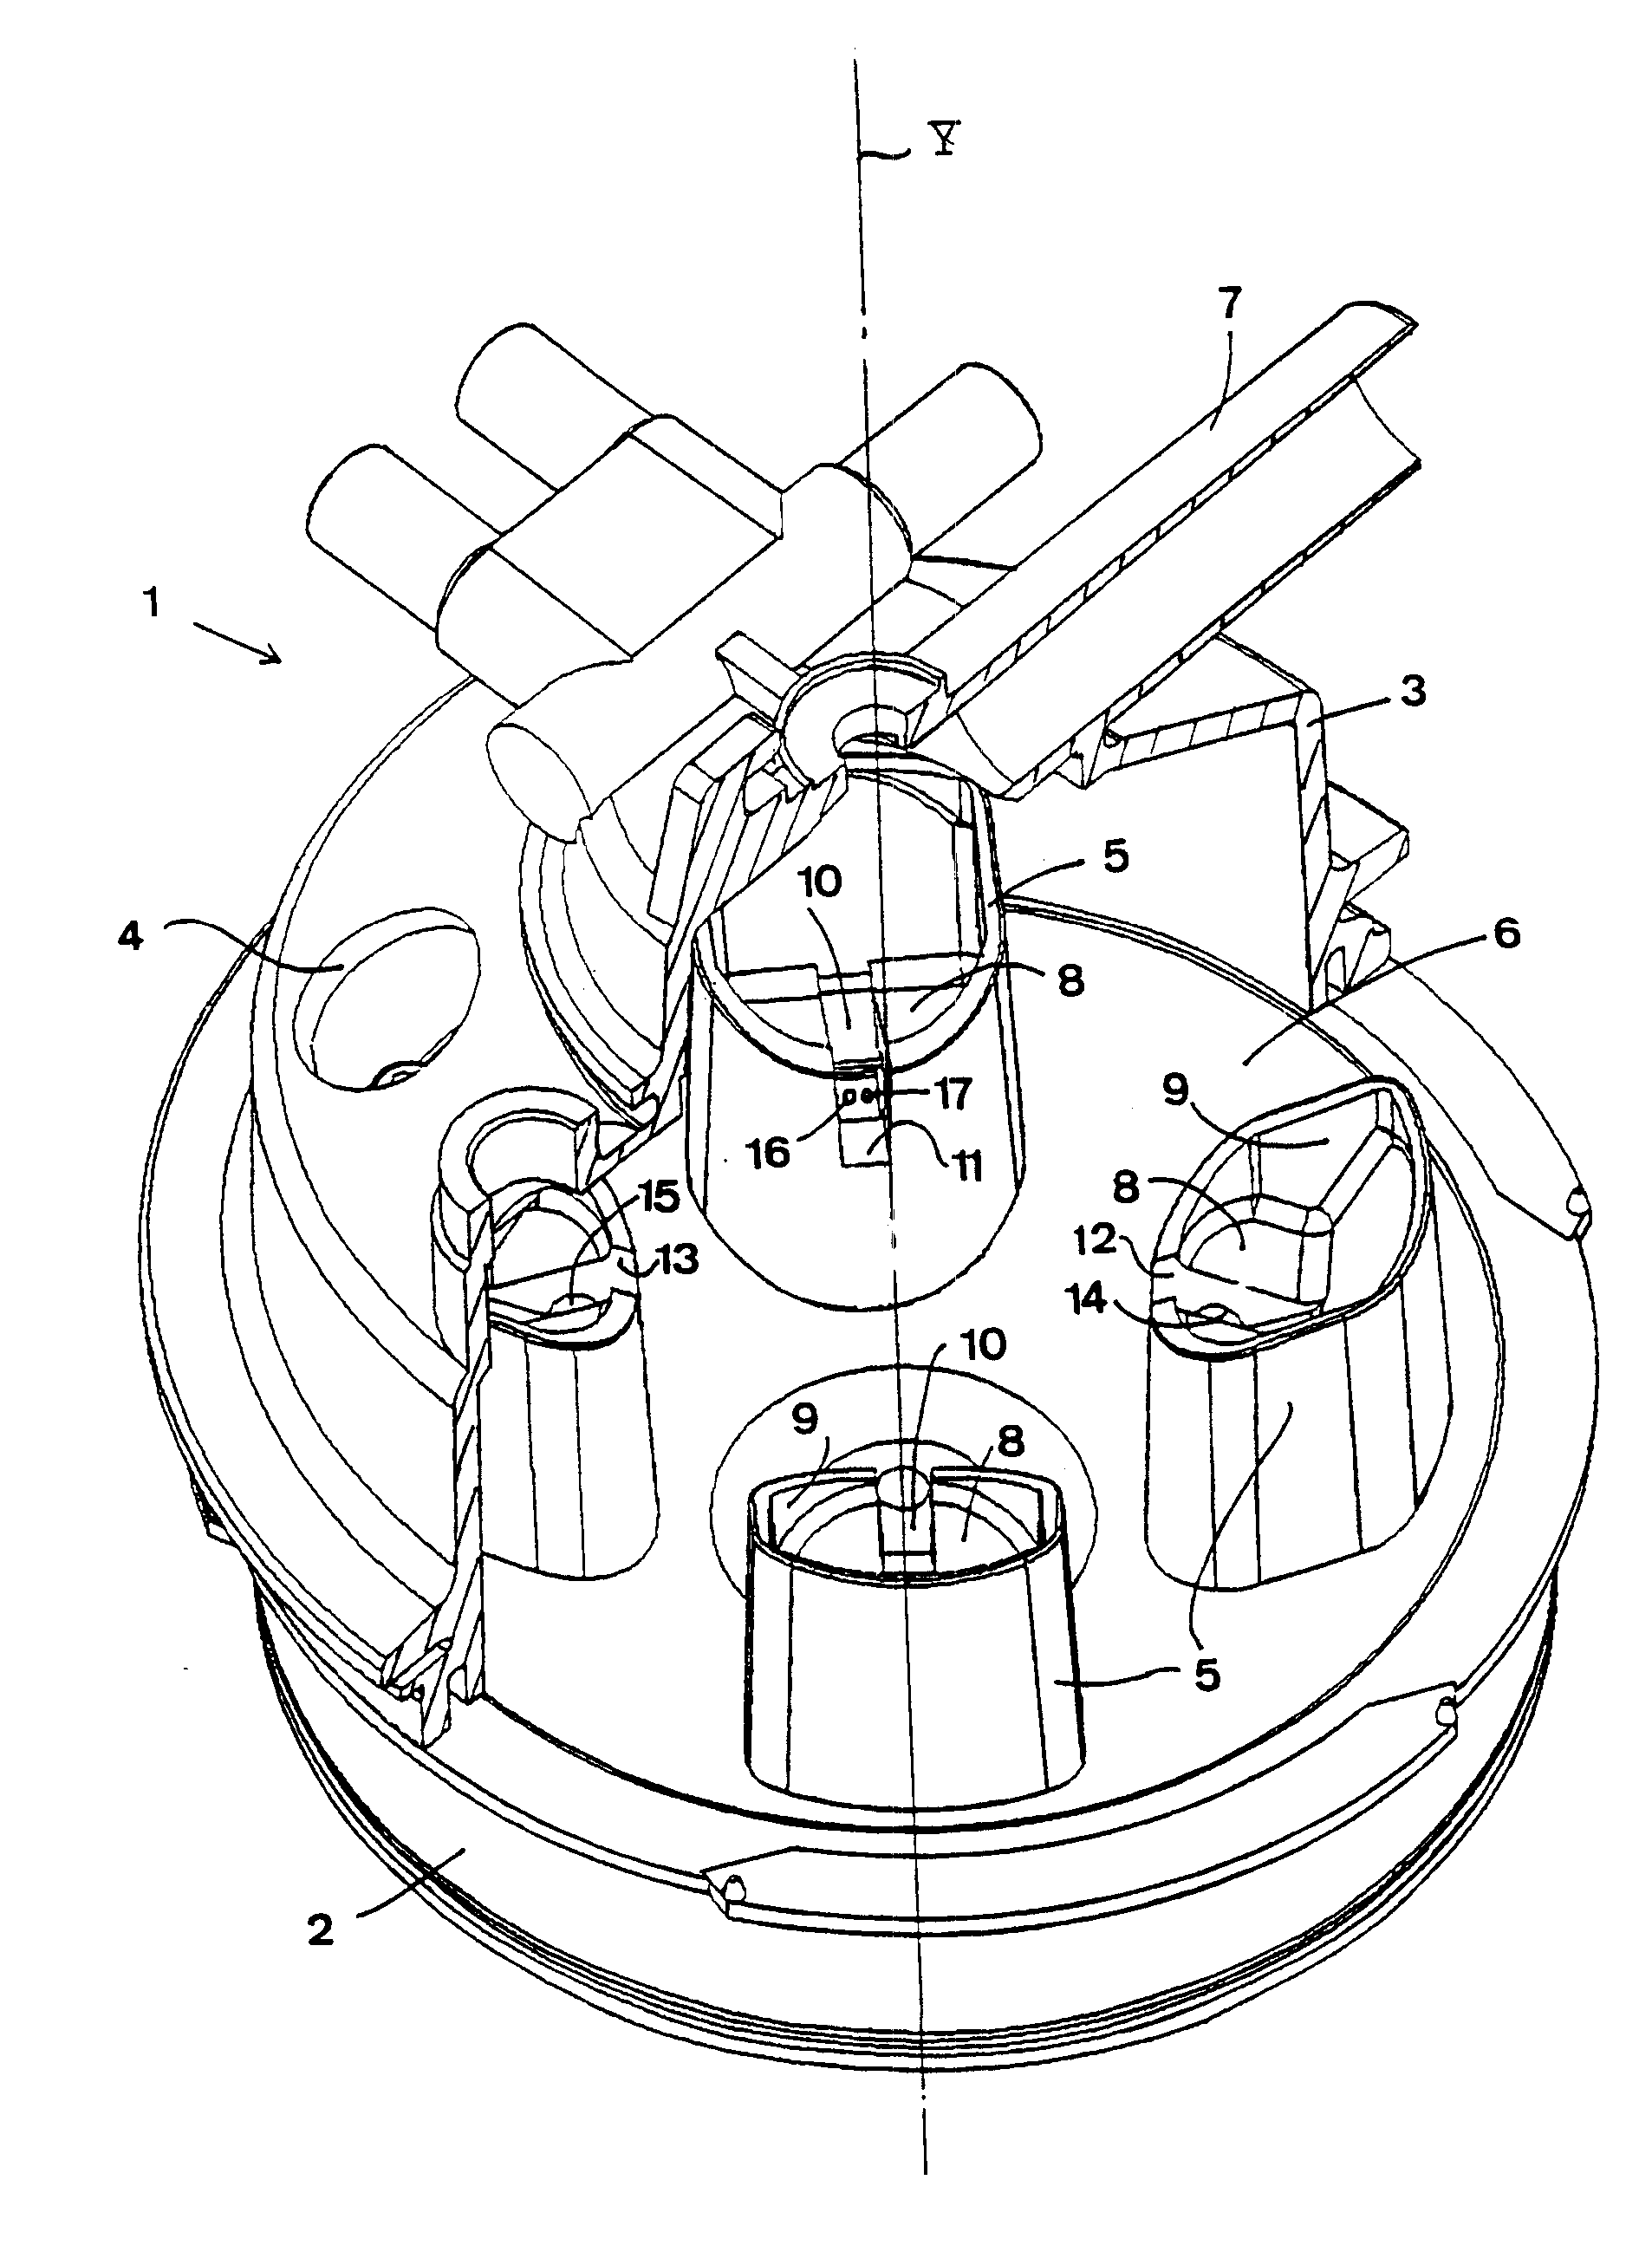 Device for measuring an electrical parameter in the milk